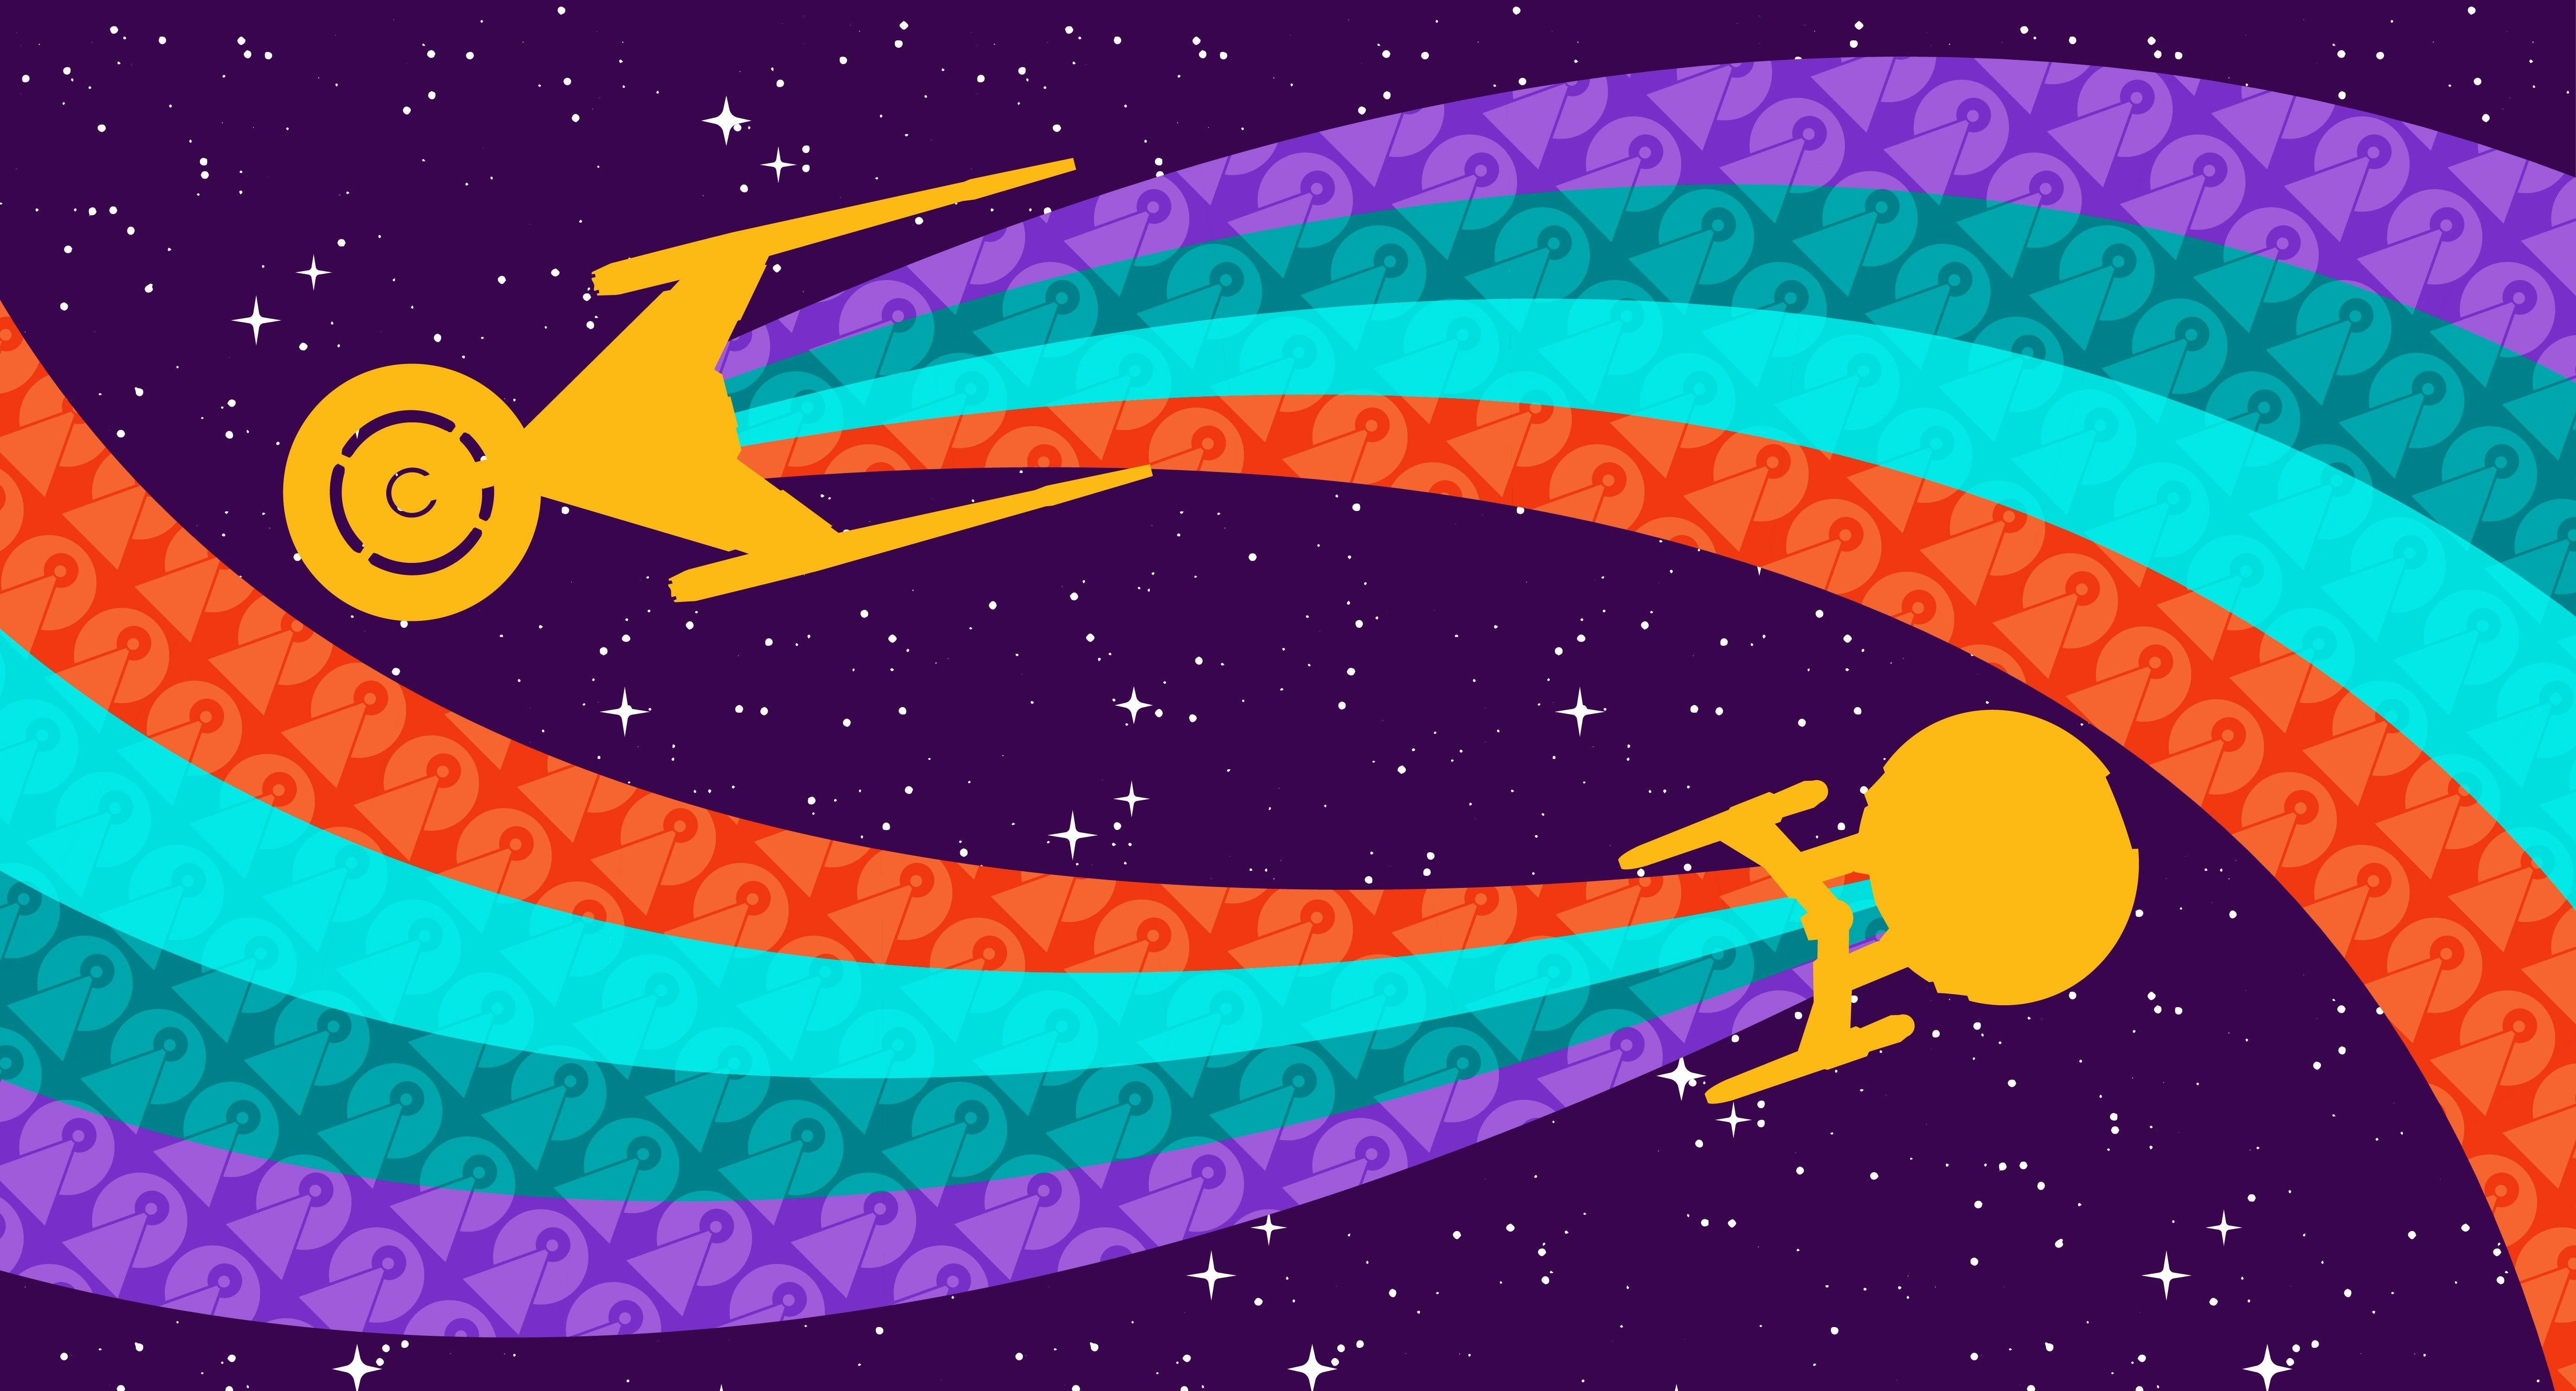 Illustrated banner of the NX-01 Enterprise and Discovery starships overlapping